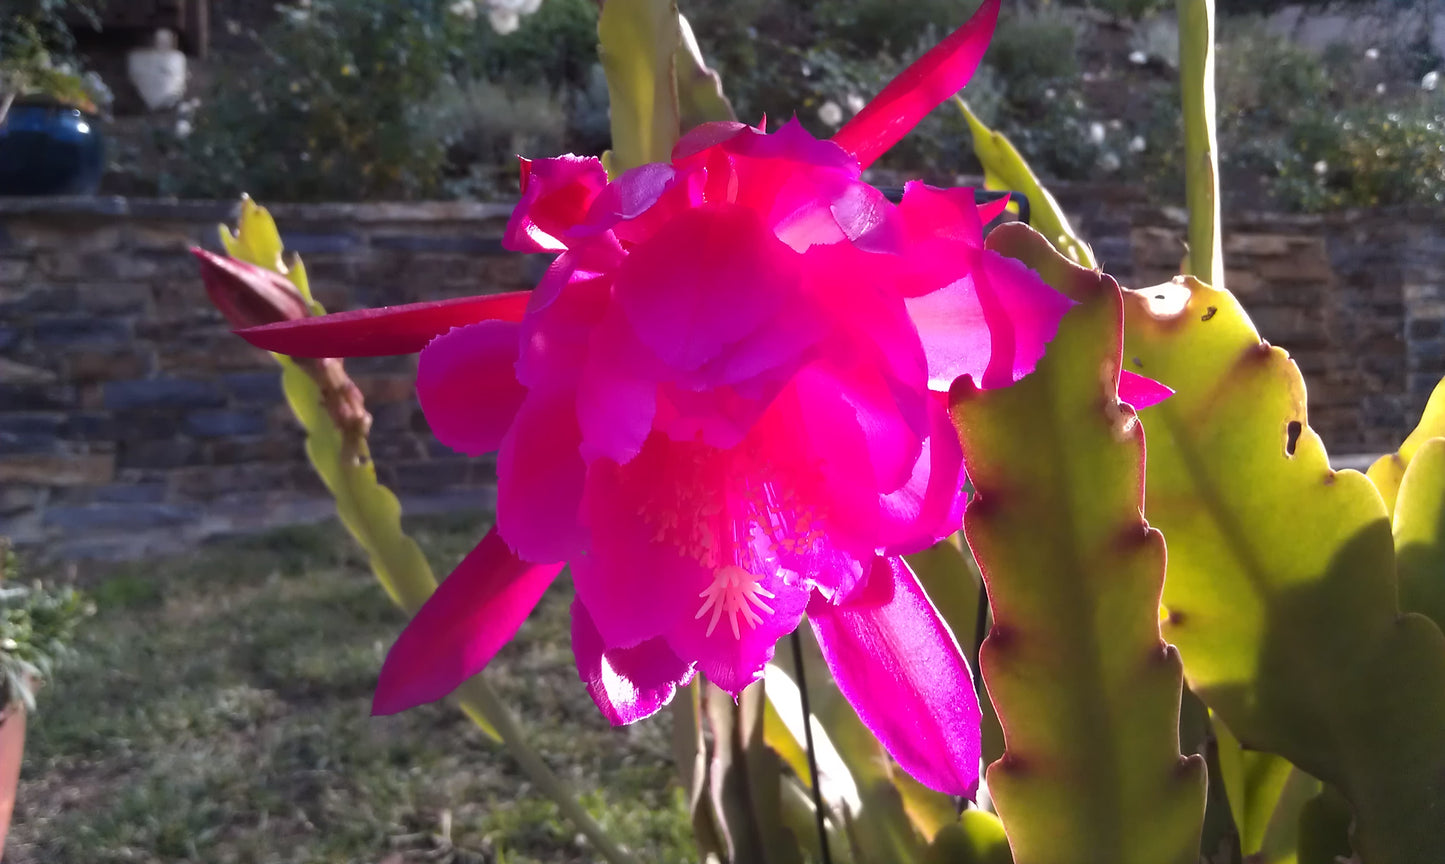 Epiphyllum Laui 6" to 1 gallon container pot live plant - 可吃昙花， 类似火龙果. Also available in 5 gallon